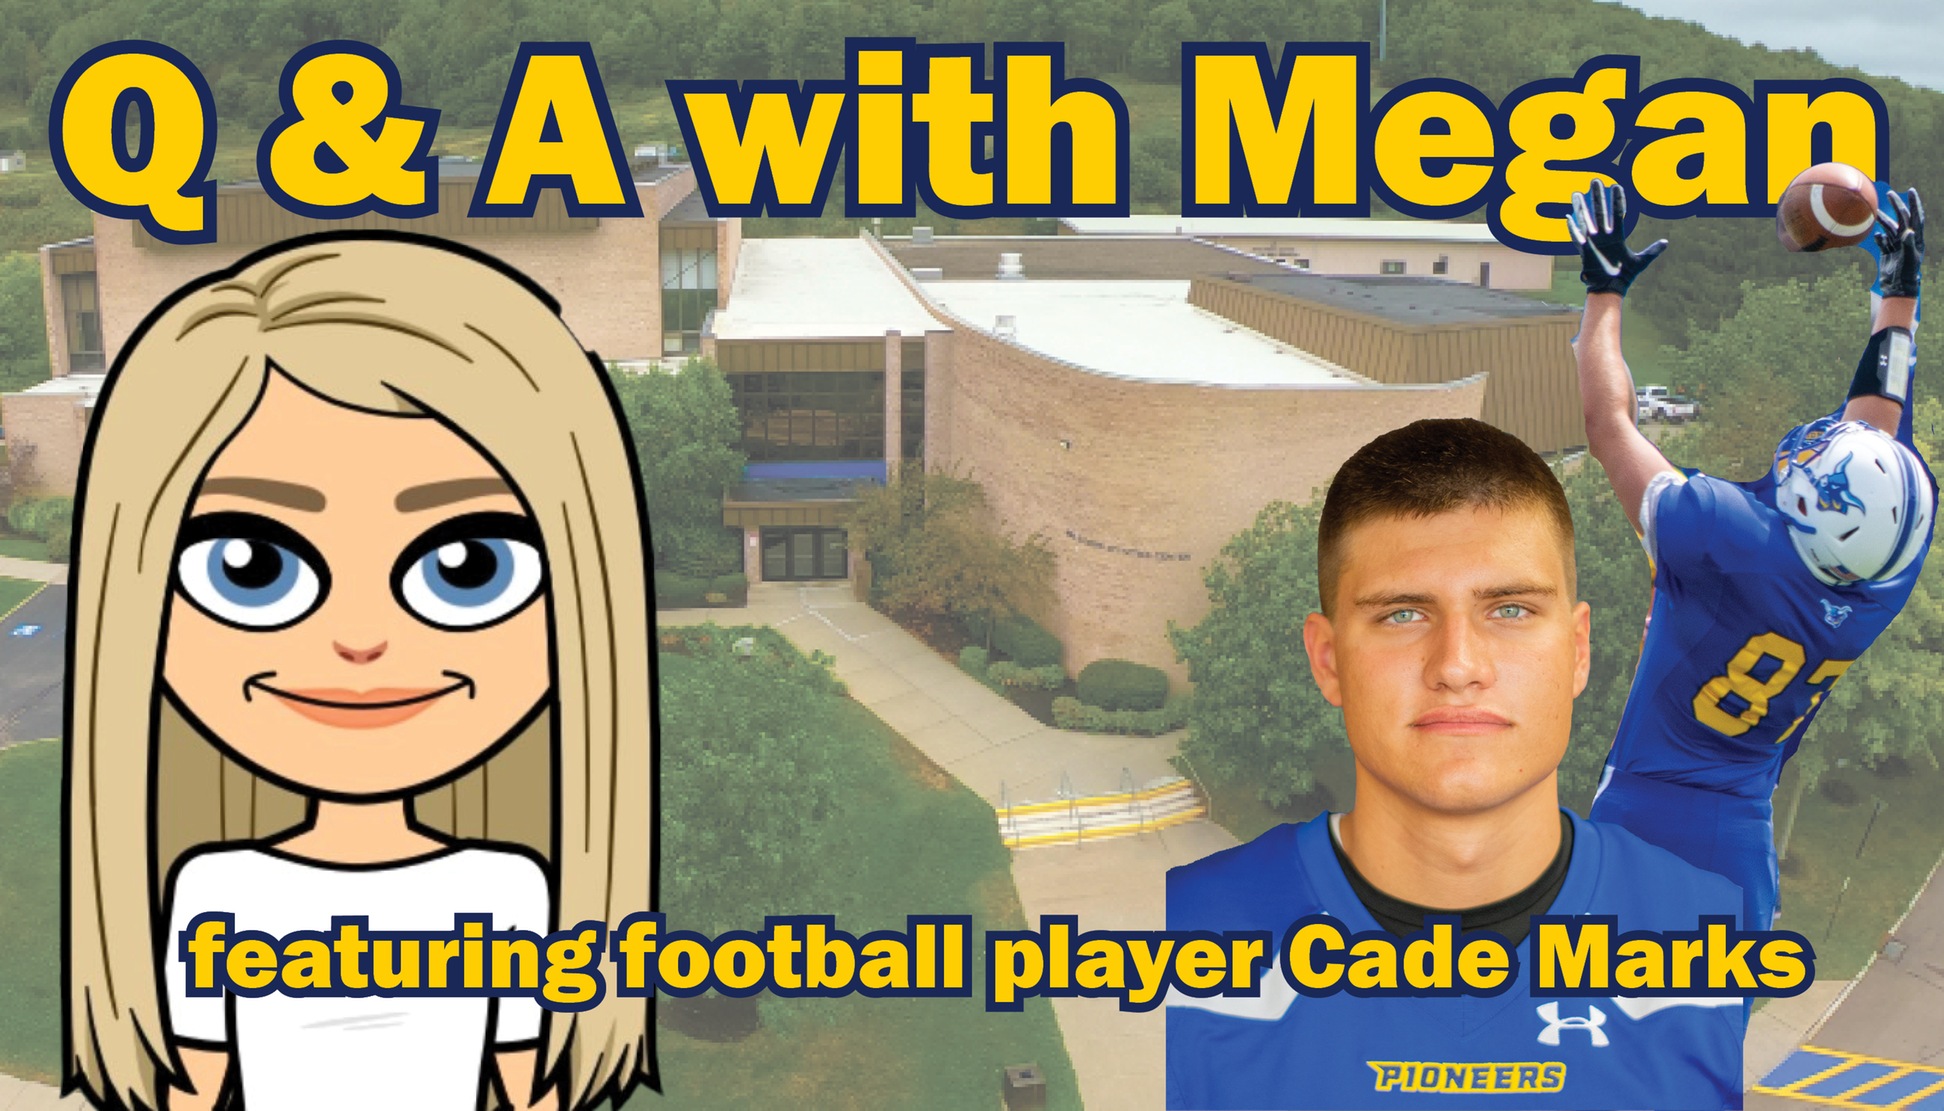 Q&A with Megan - featuring Cade Marks 
pictured is a bitmoji of Megan and a photo of Cade Marks